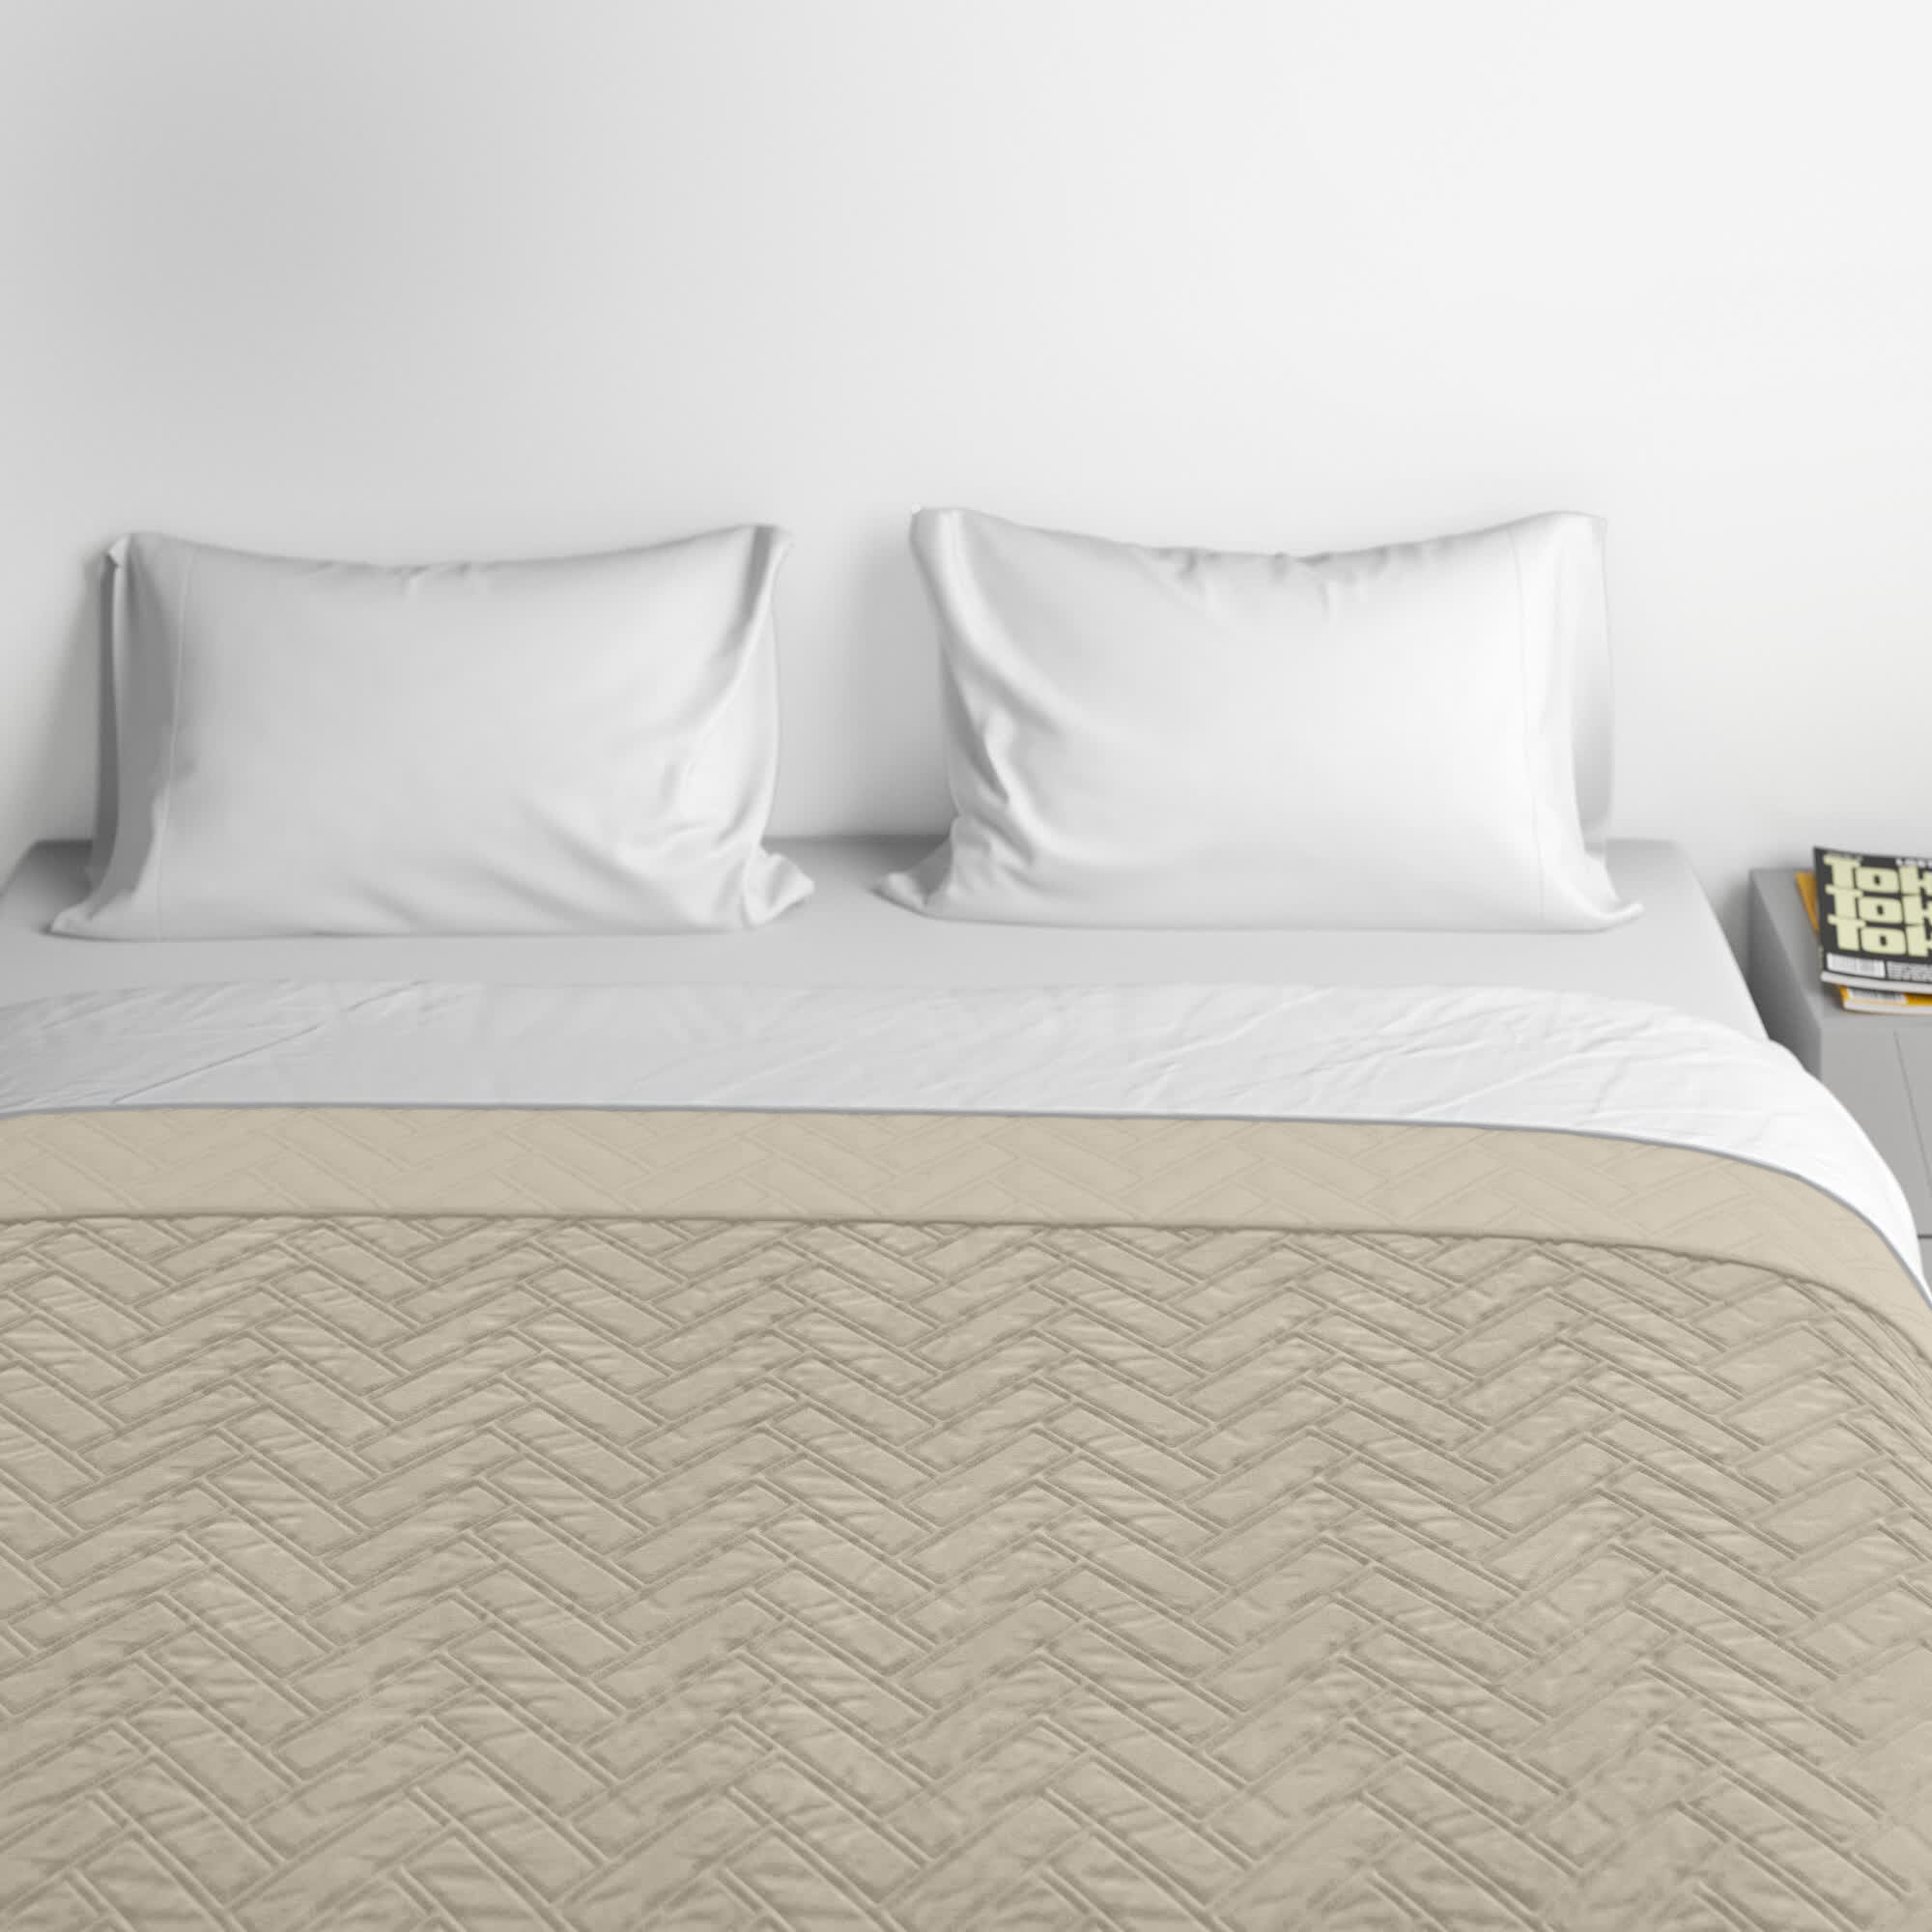 This 'Luxuriously Soft' Duvet Insert Is $21 at